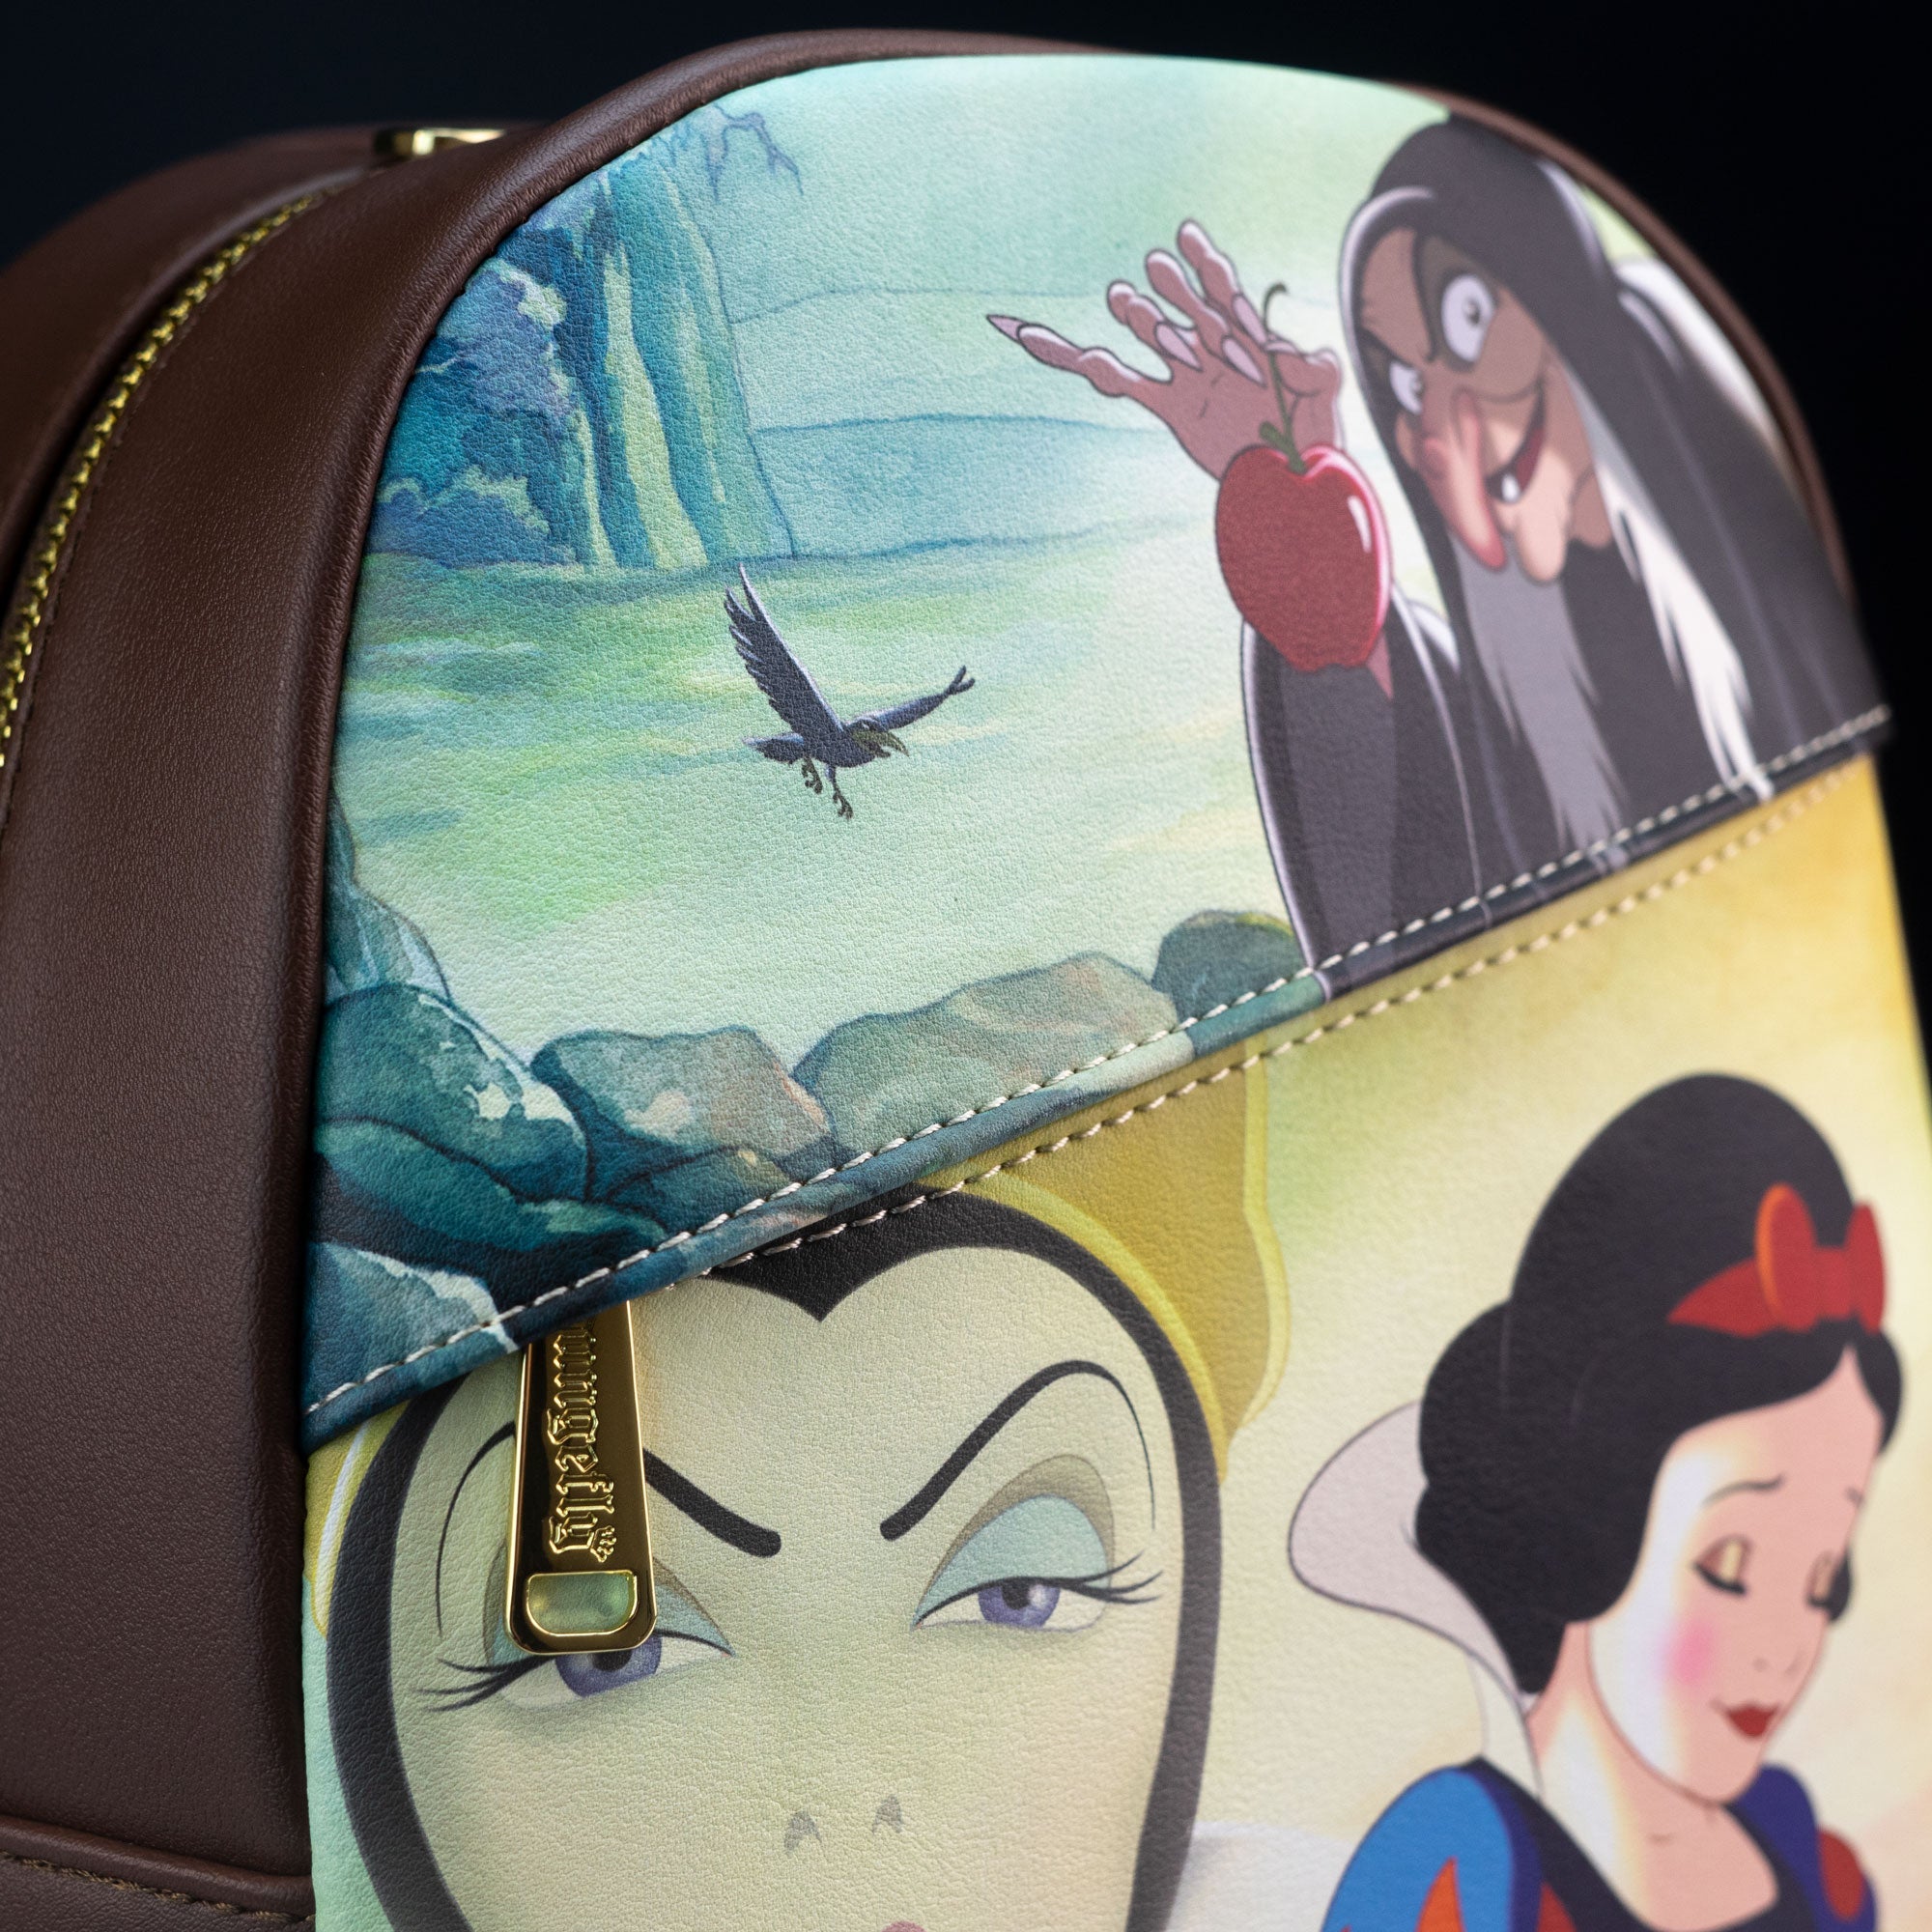 Loungefly x Disney Snow White DEC Mini Backpack - GeekCore